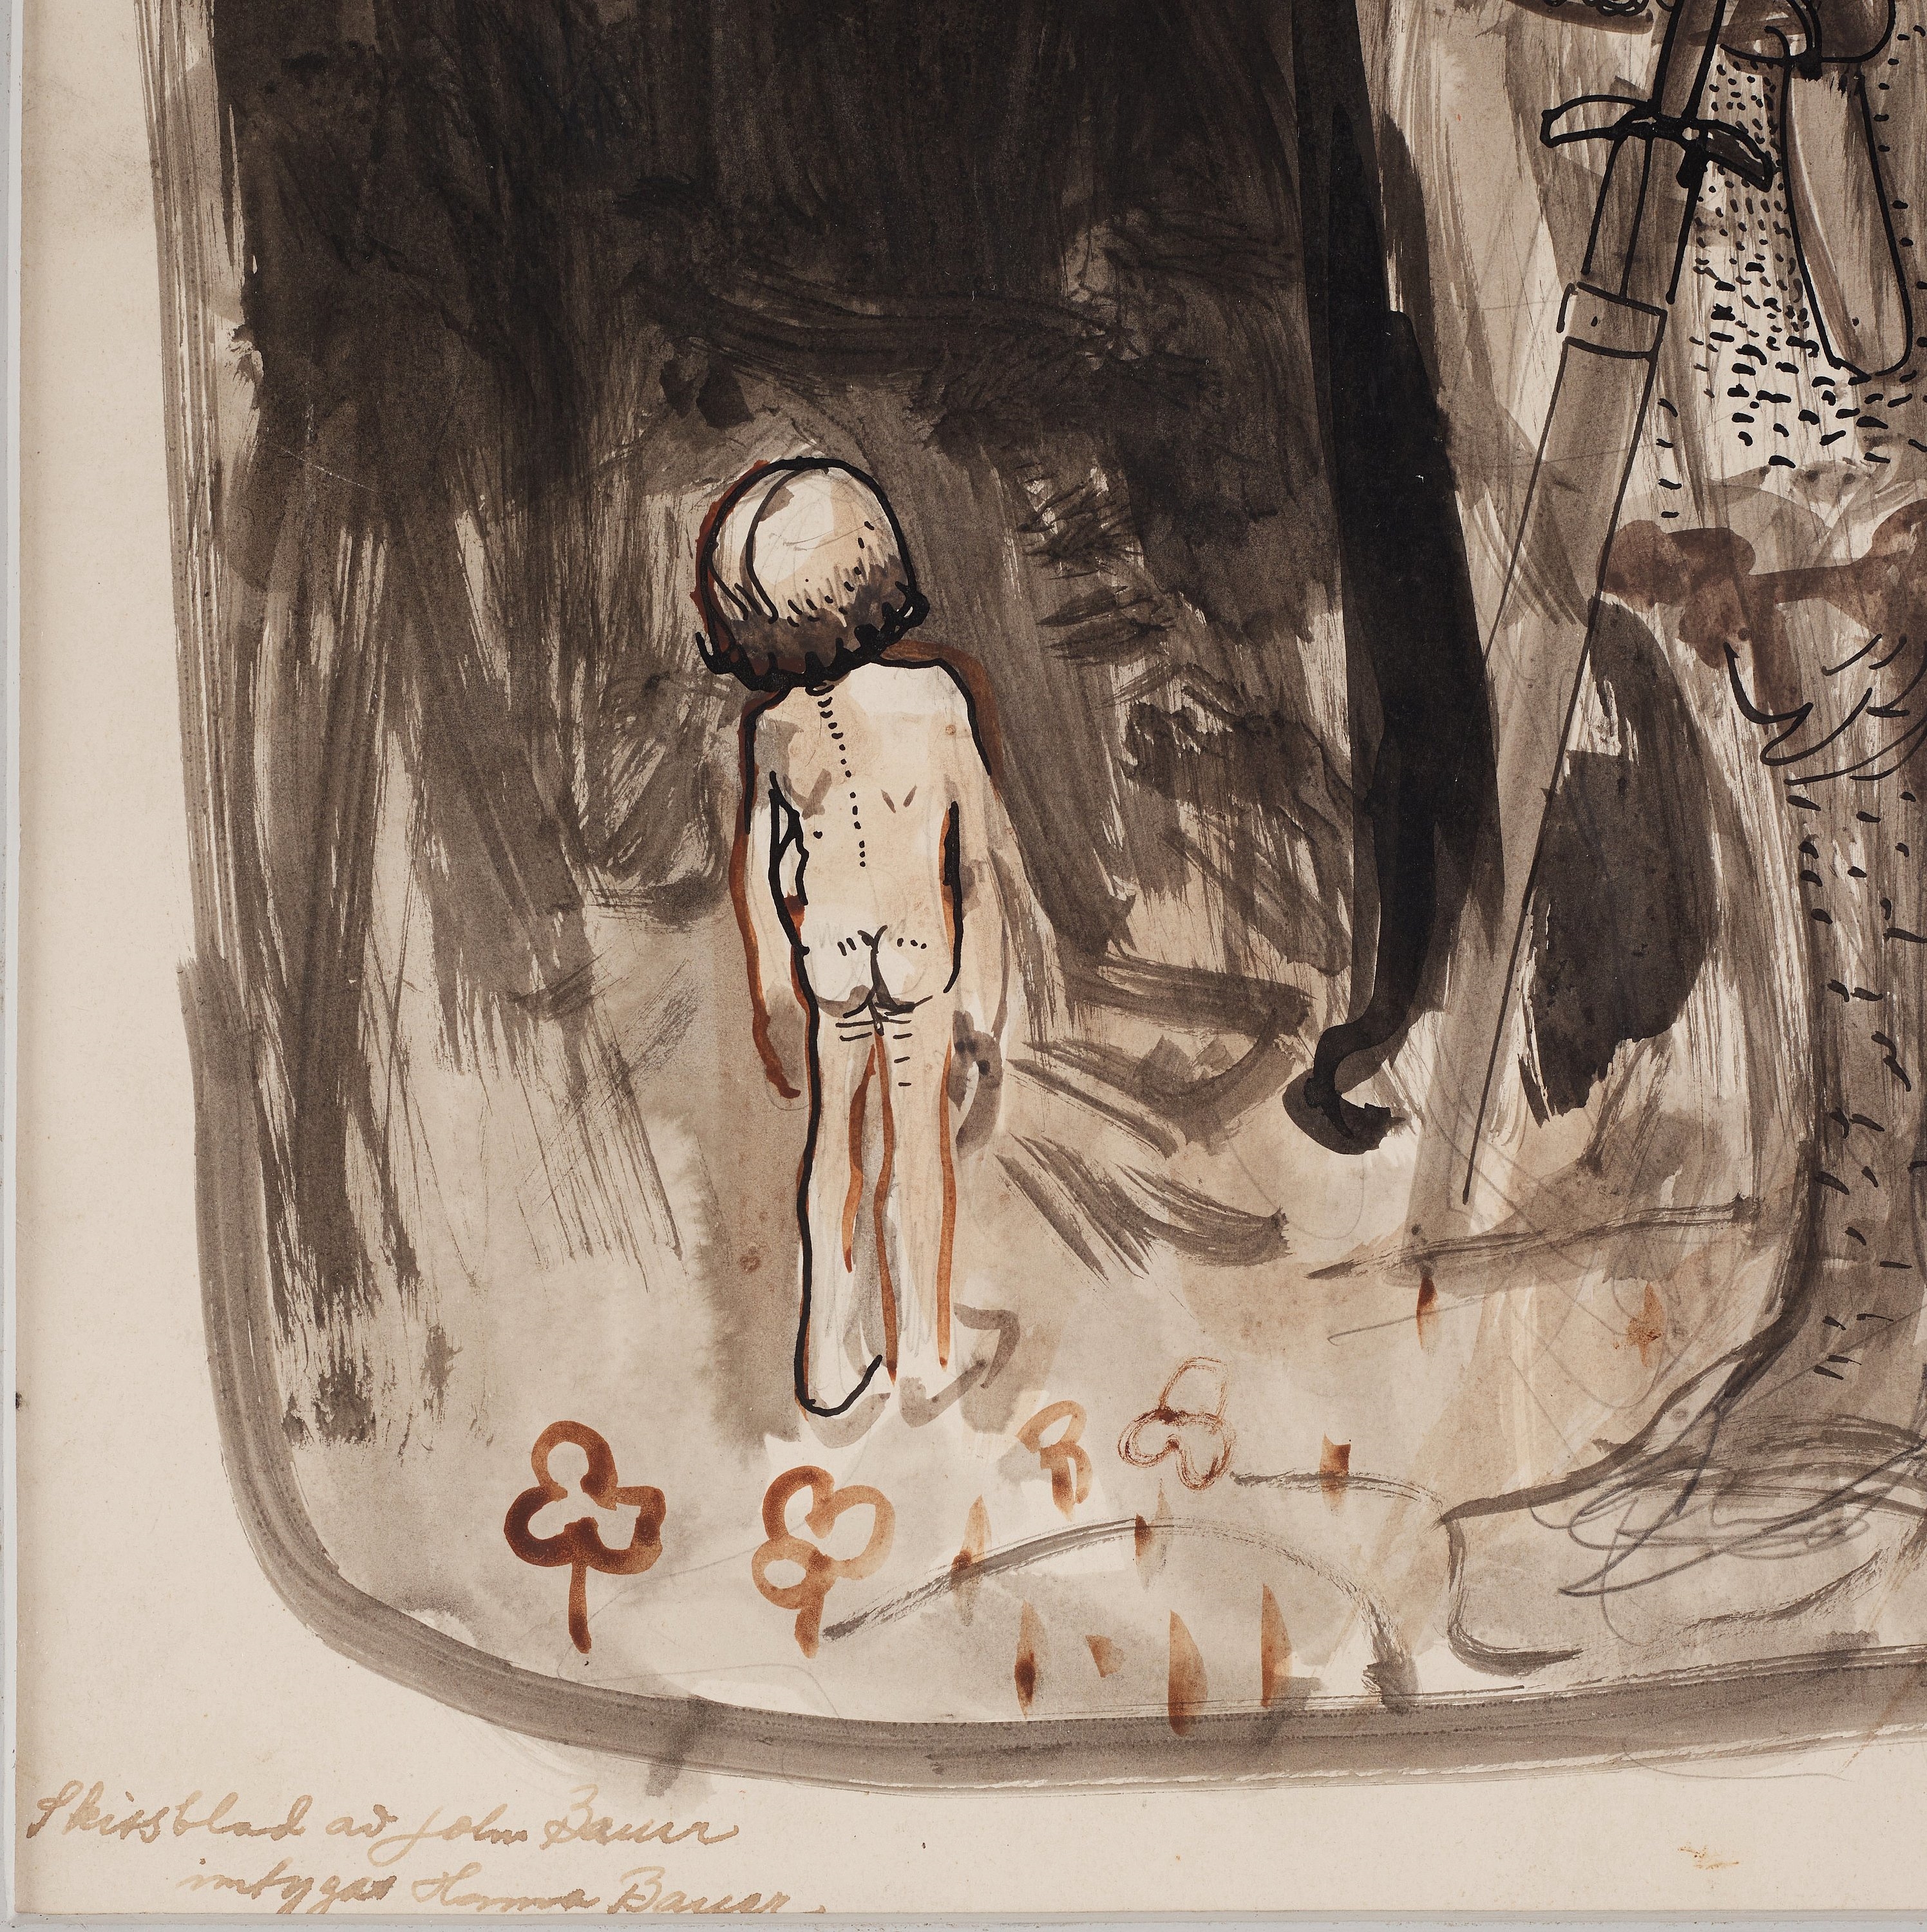 Artwork by John Bauer, Young Boy and Knight in the Woods, Made of Mixed media on paper